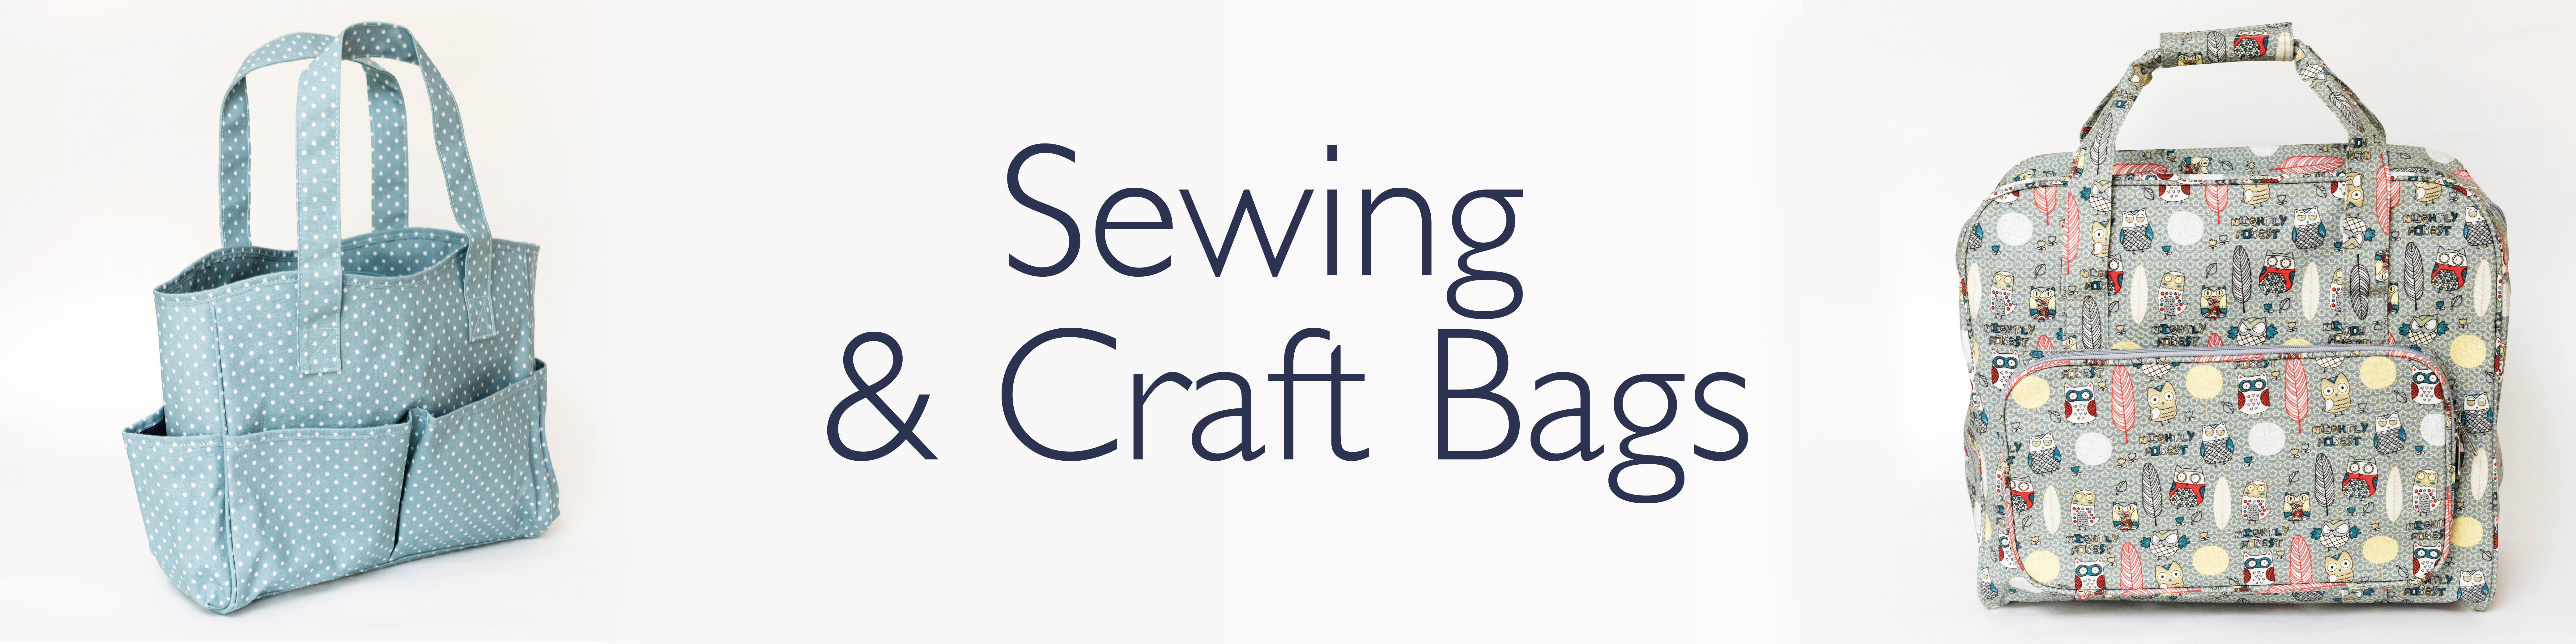 Sewing and Craft Bags